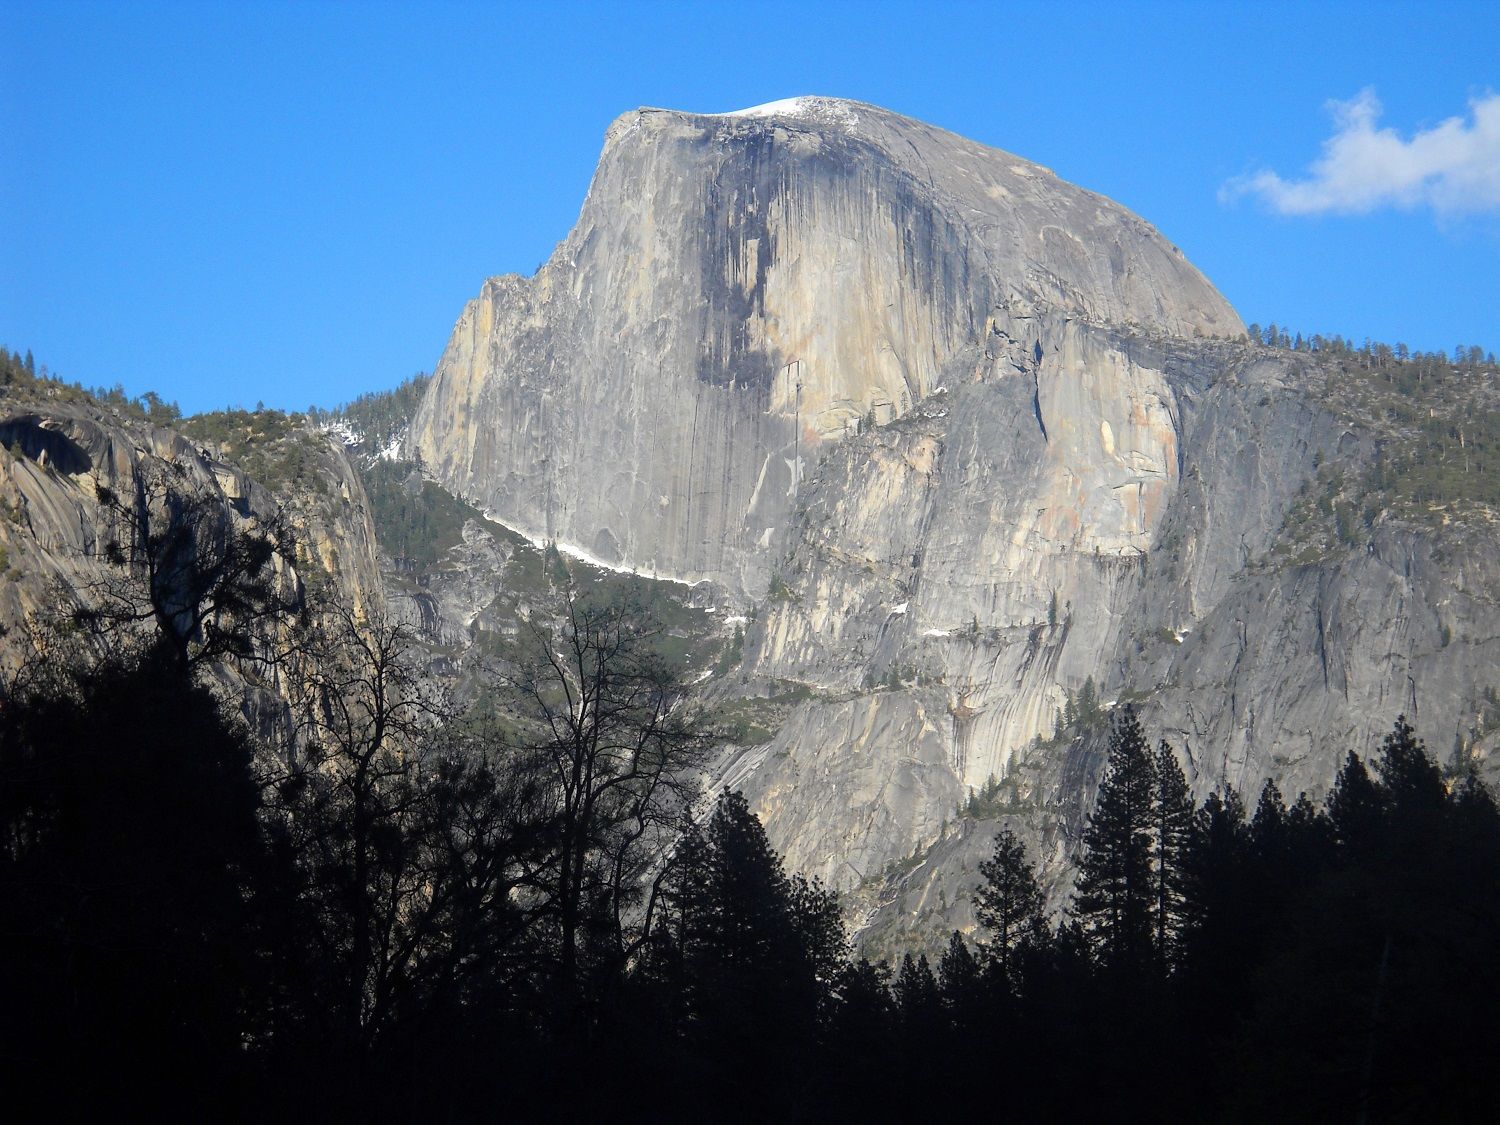 This April 2013 image shows Half Dome, the iconic granite peak in Yosemite National Park in California. Beautiful scenery, from mountain views to waterfalls, is easily accessible to visitors at Yosemite. (AP Photo/Kathy Matheson)